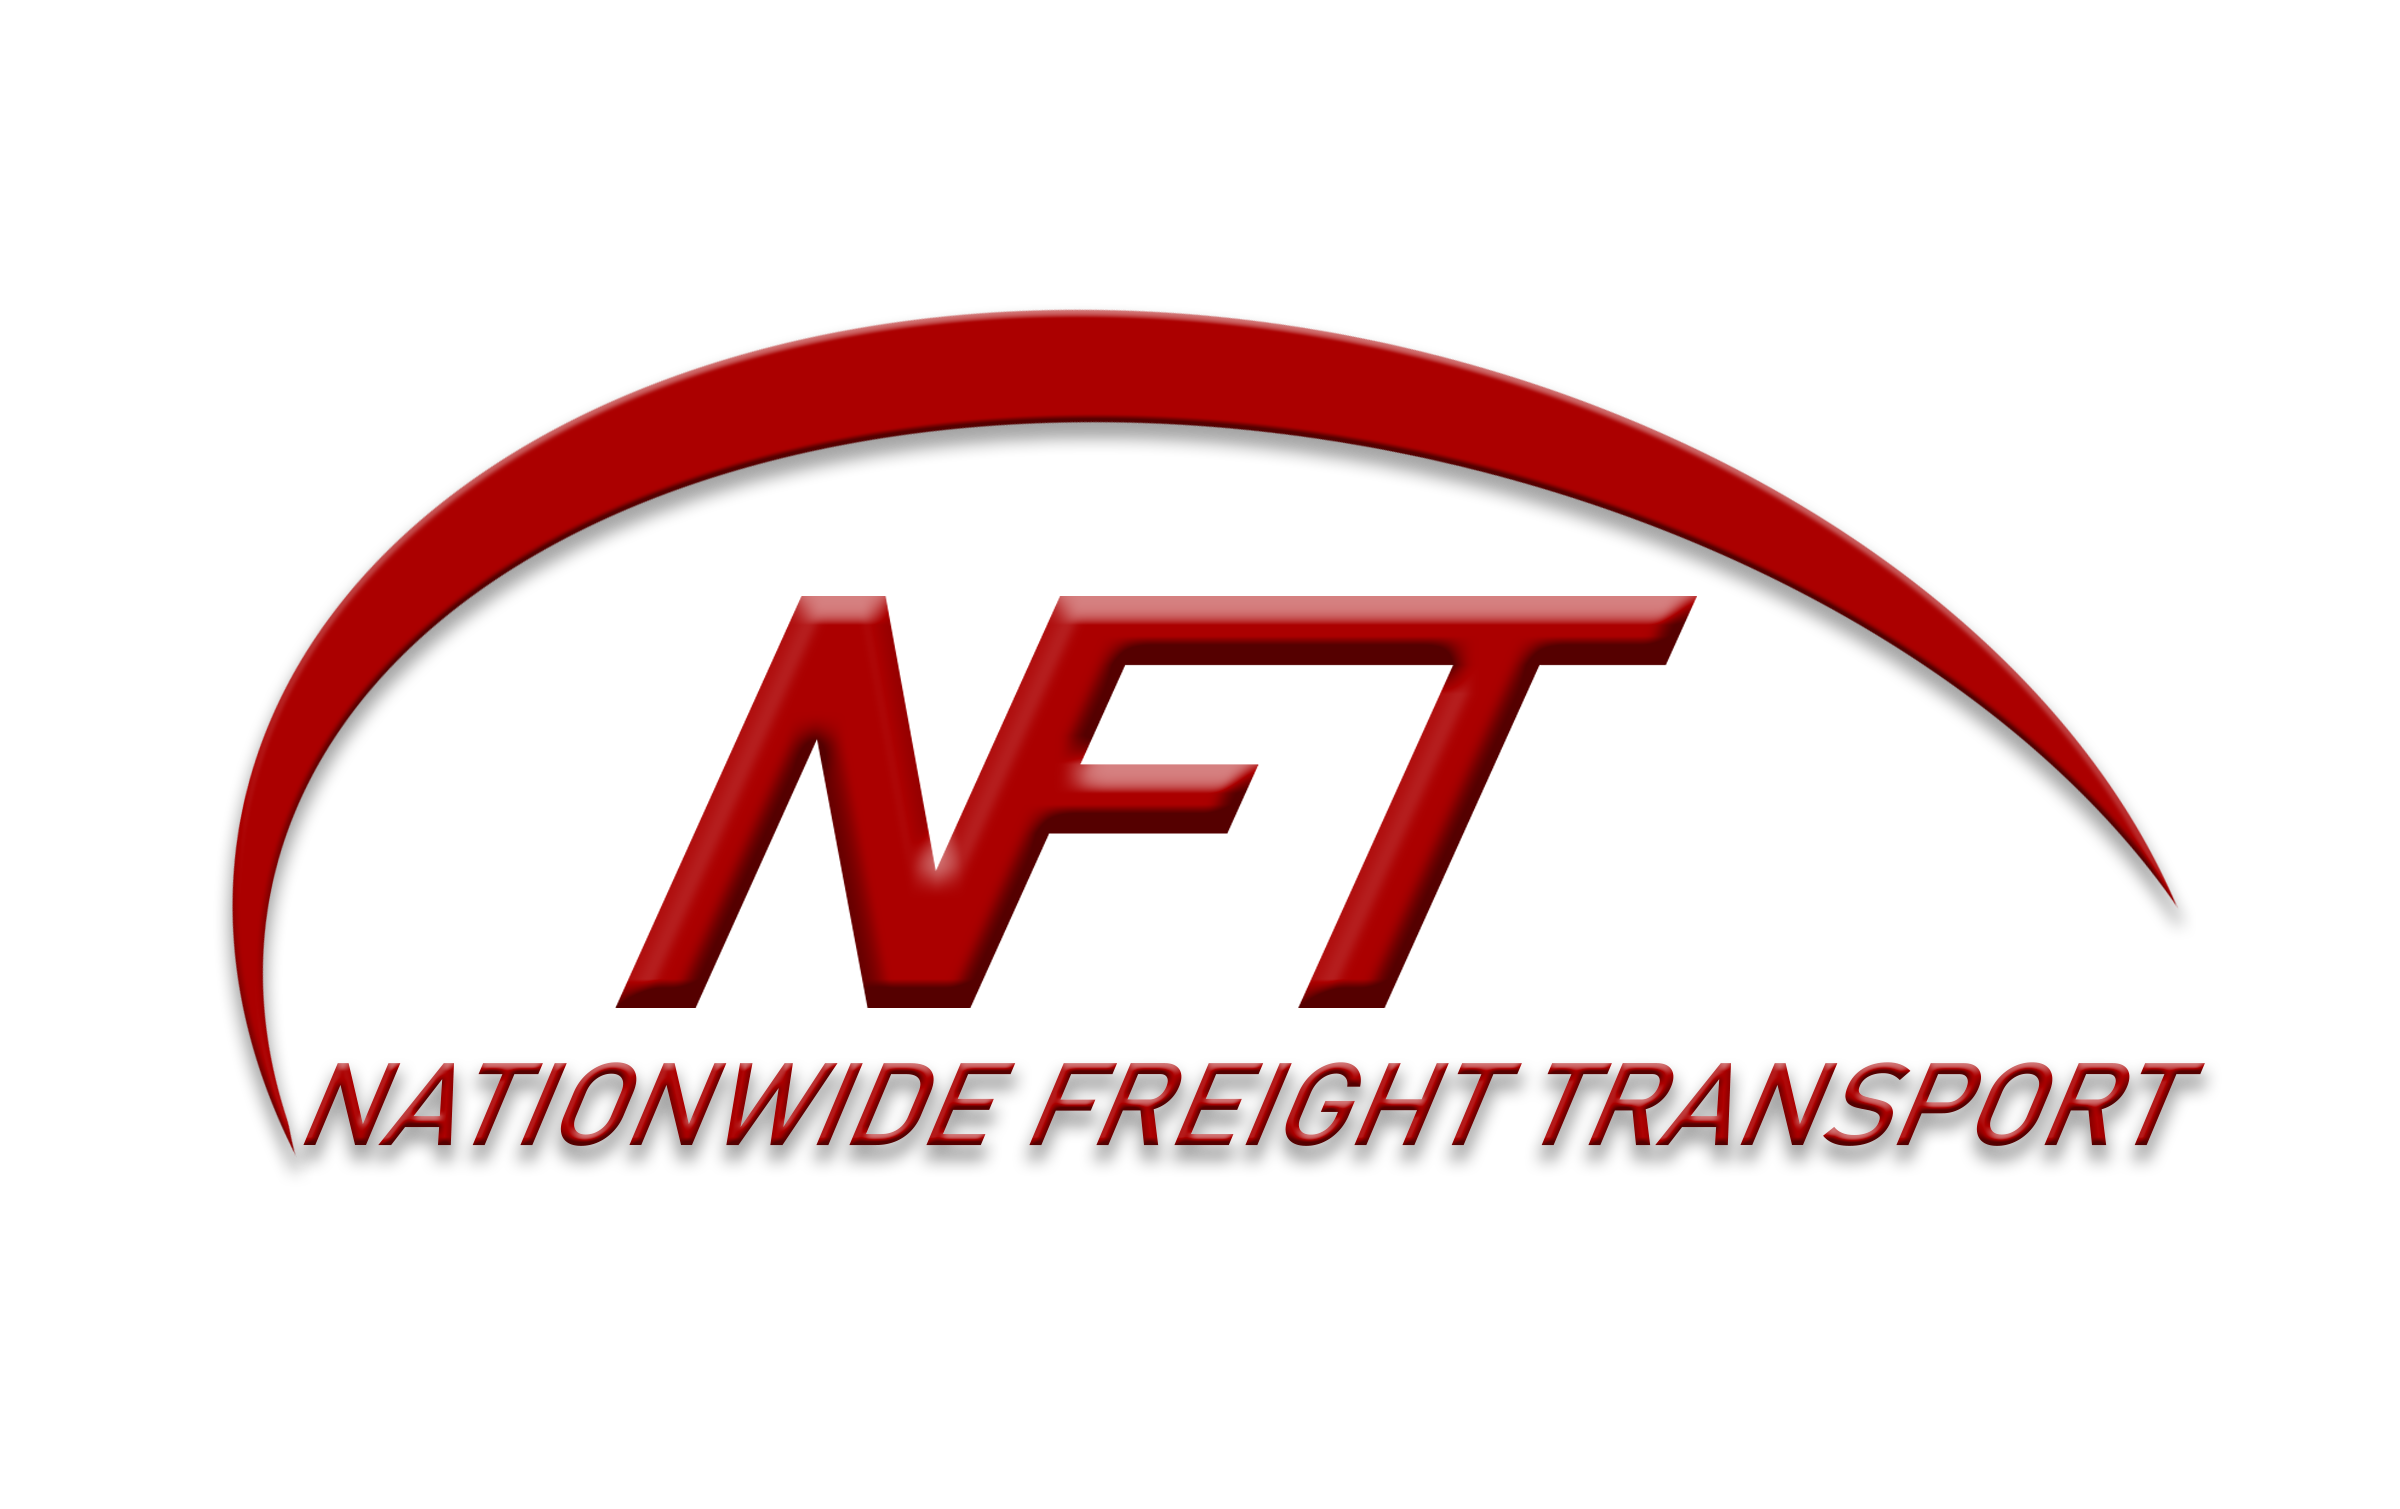 Nationwide Freight Transport